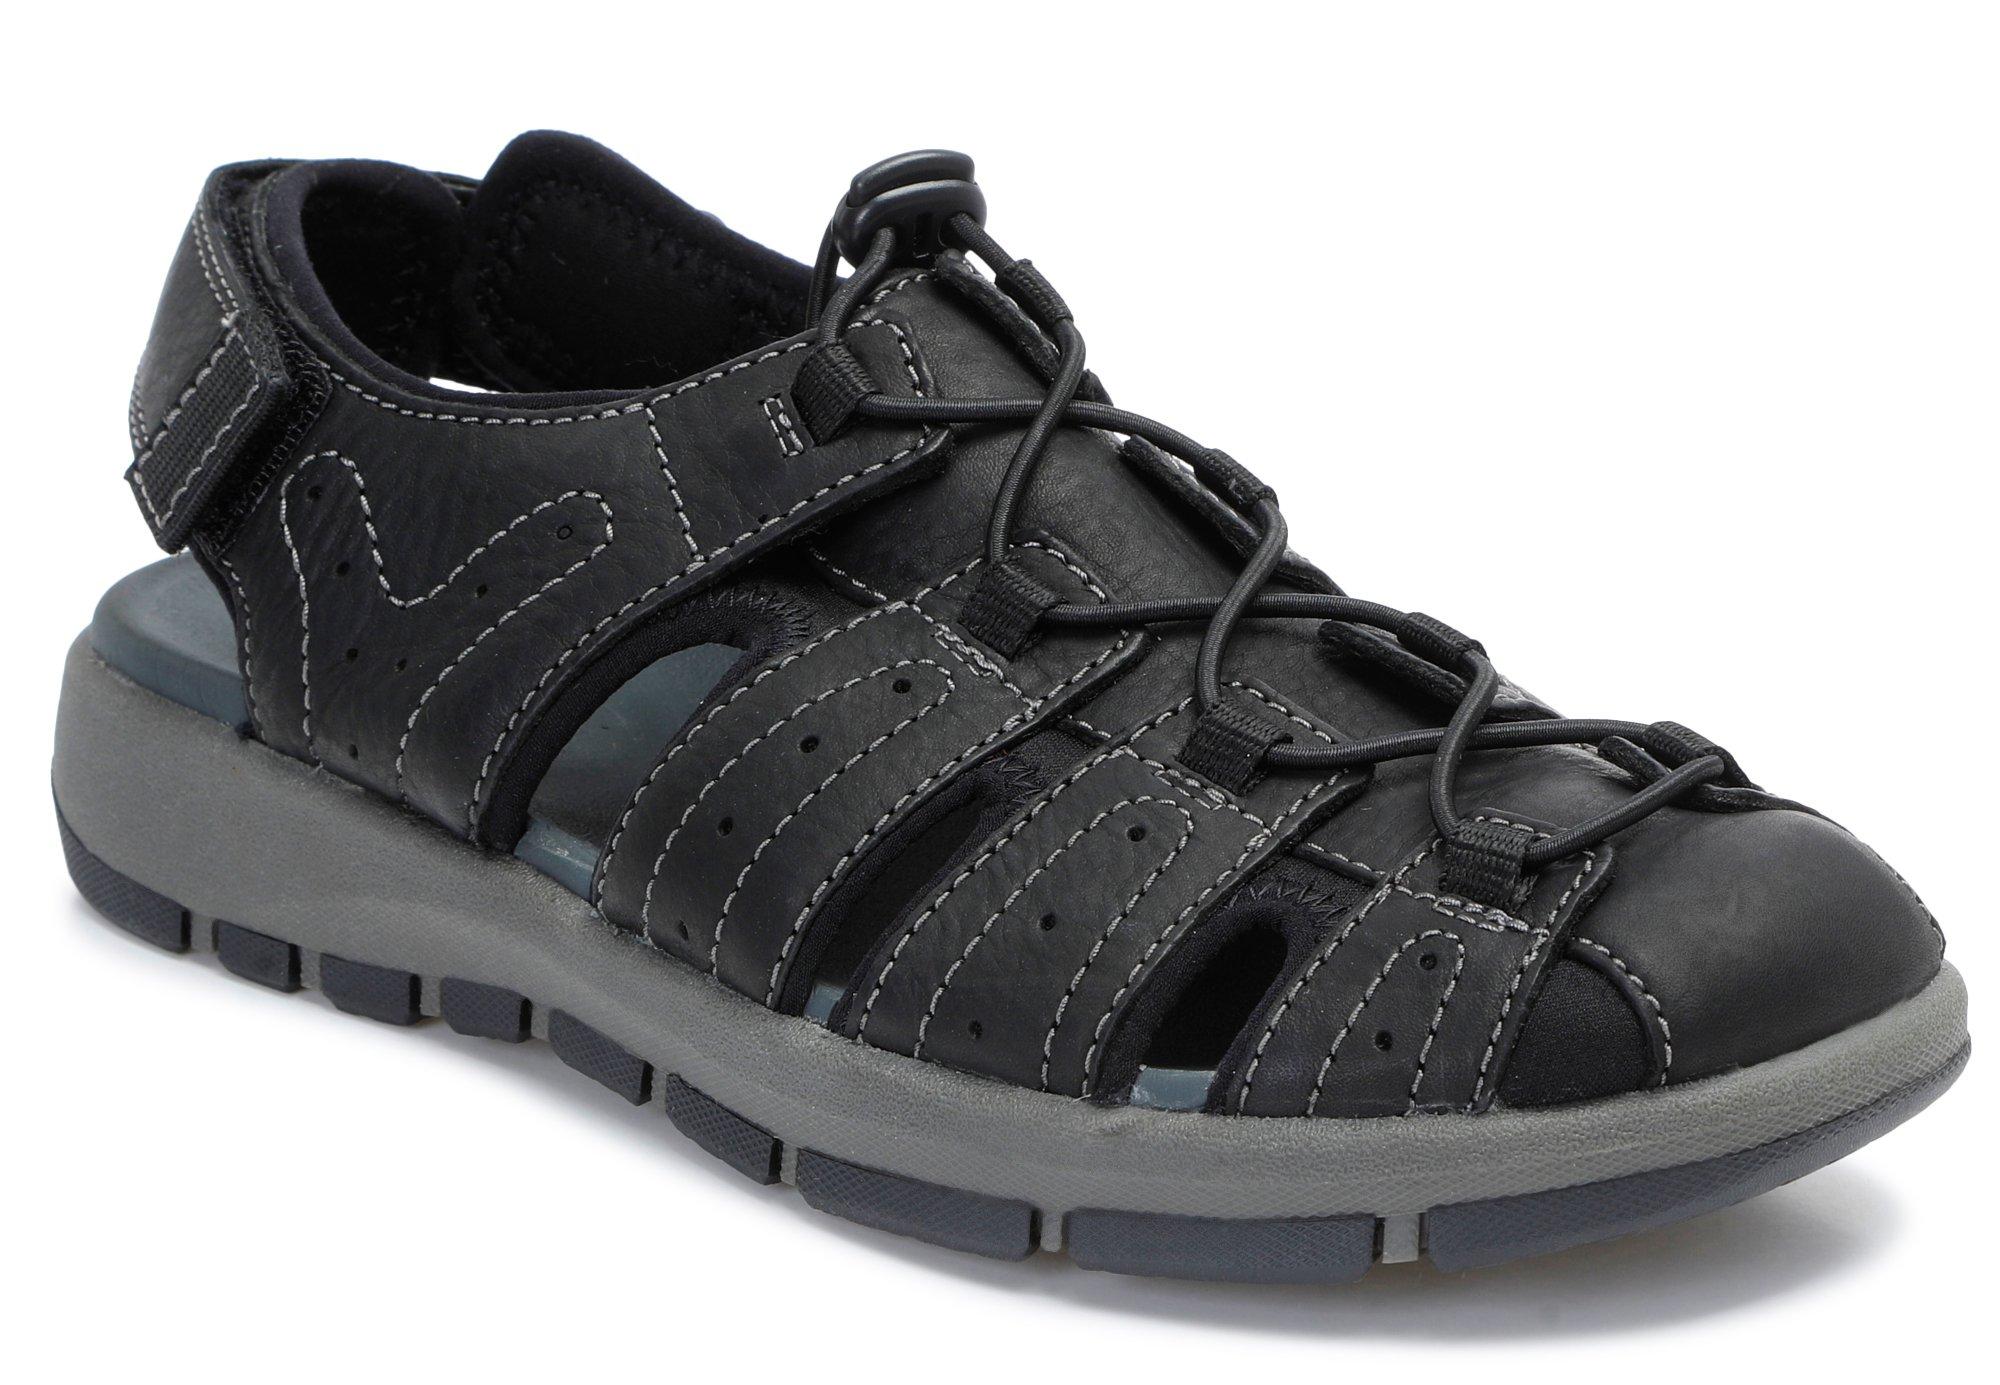 Men's Brixby Cove Leather Sandals